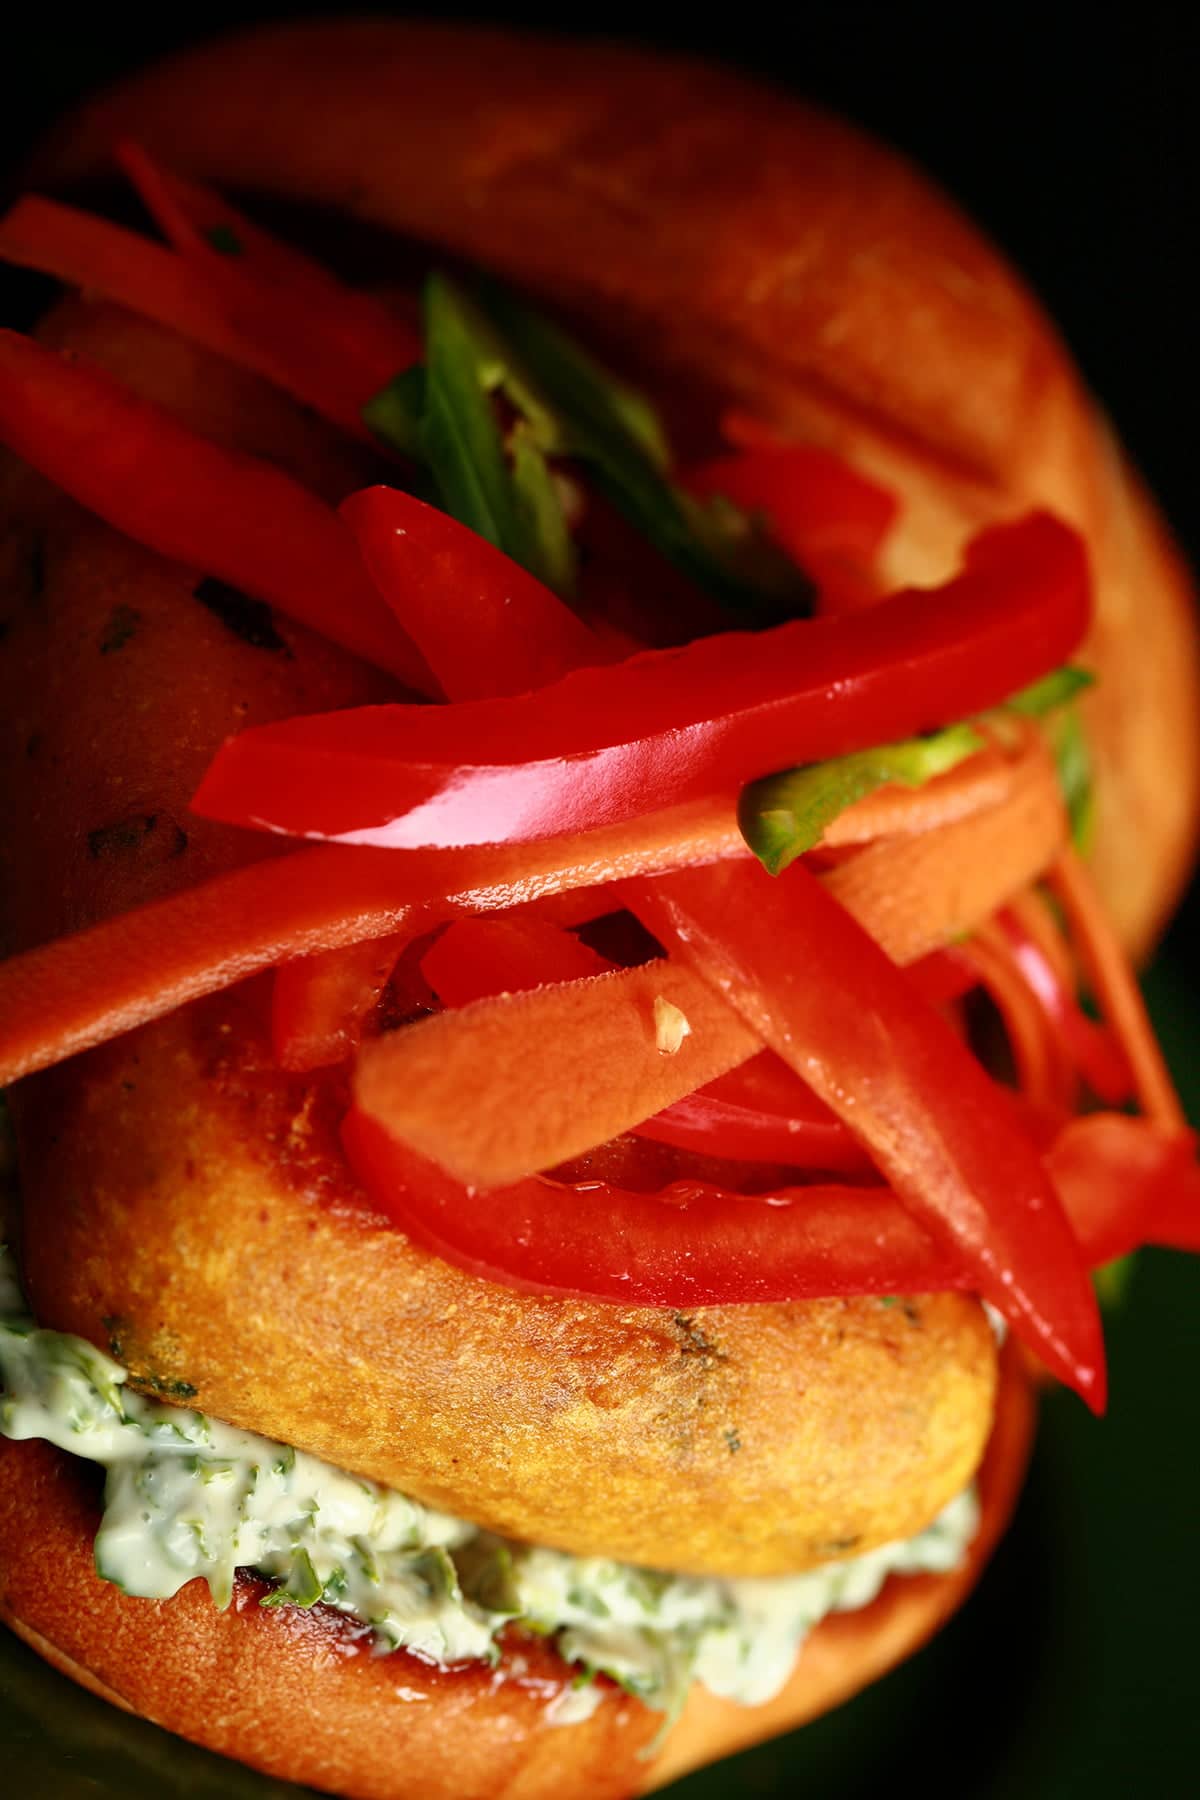 A very close up view of a Paneer Burger - a pakora battered patty of paneer, with cilantro-mint mayonnaise and a pickled slaw made of red peppers, carrots, and jalapenos, on a bun.